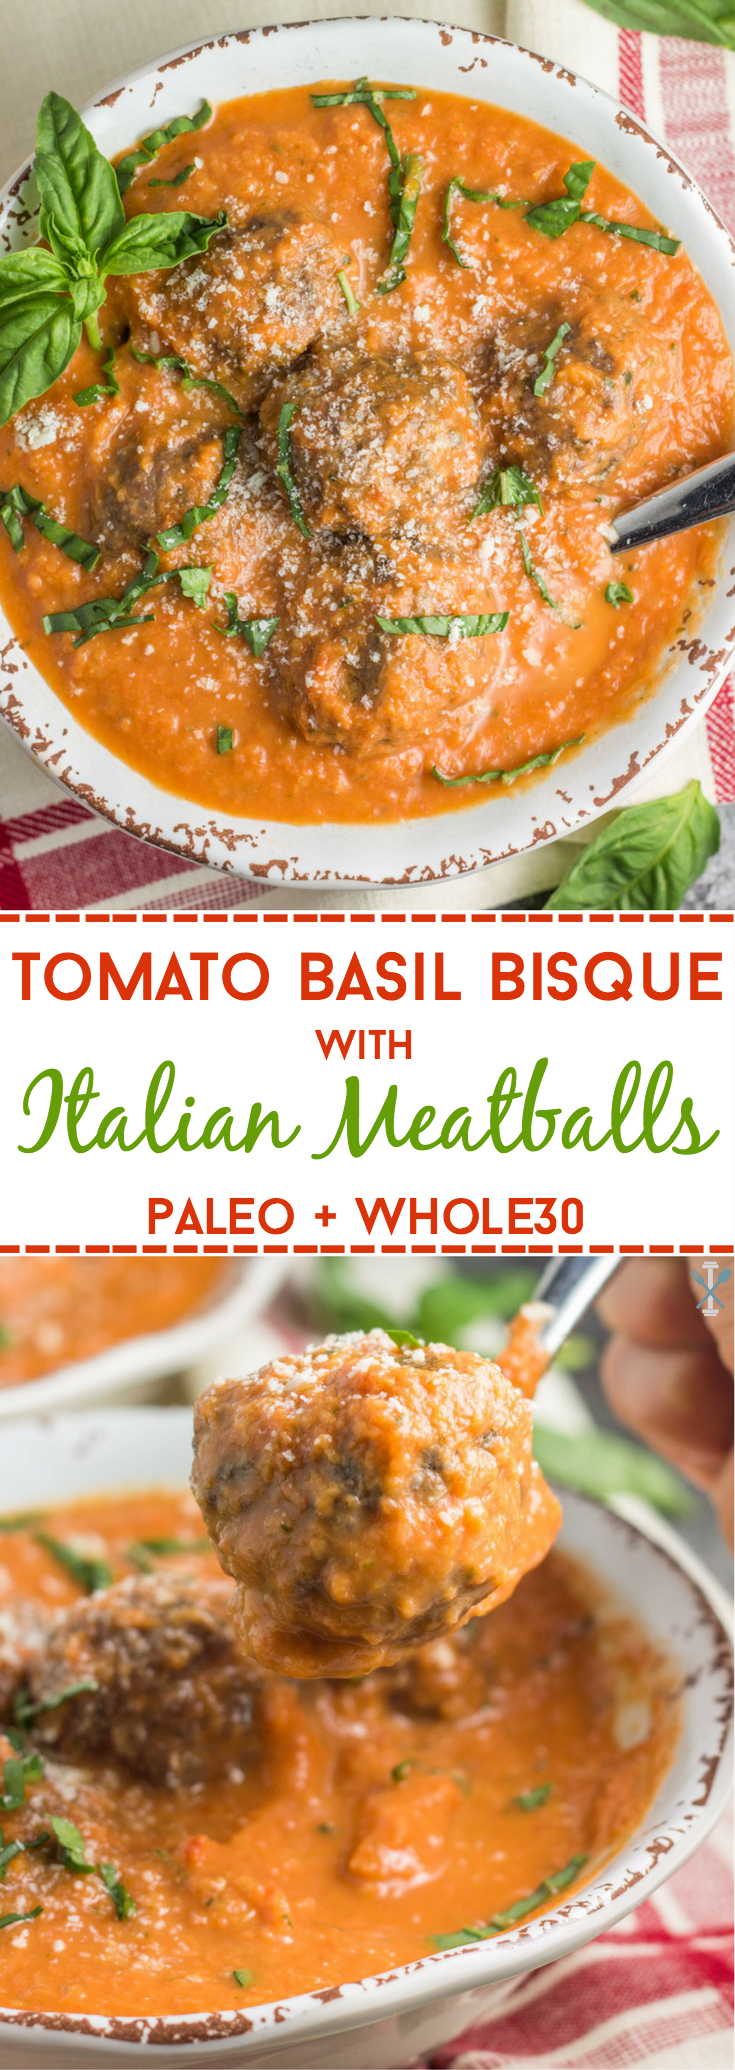 This dairy free and Whole30 compliant tomato basil bisque with Italian meatballs is an easy winter soup with simple ingredients!